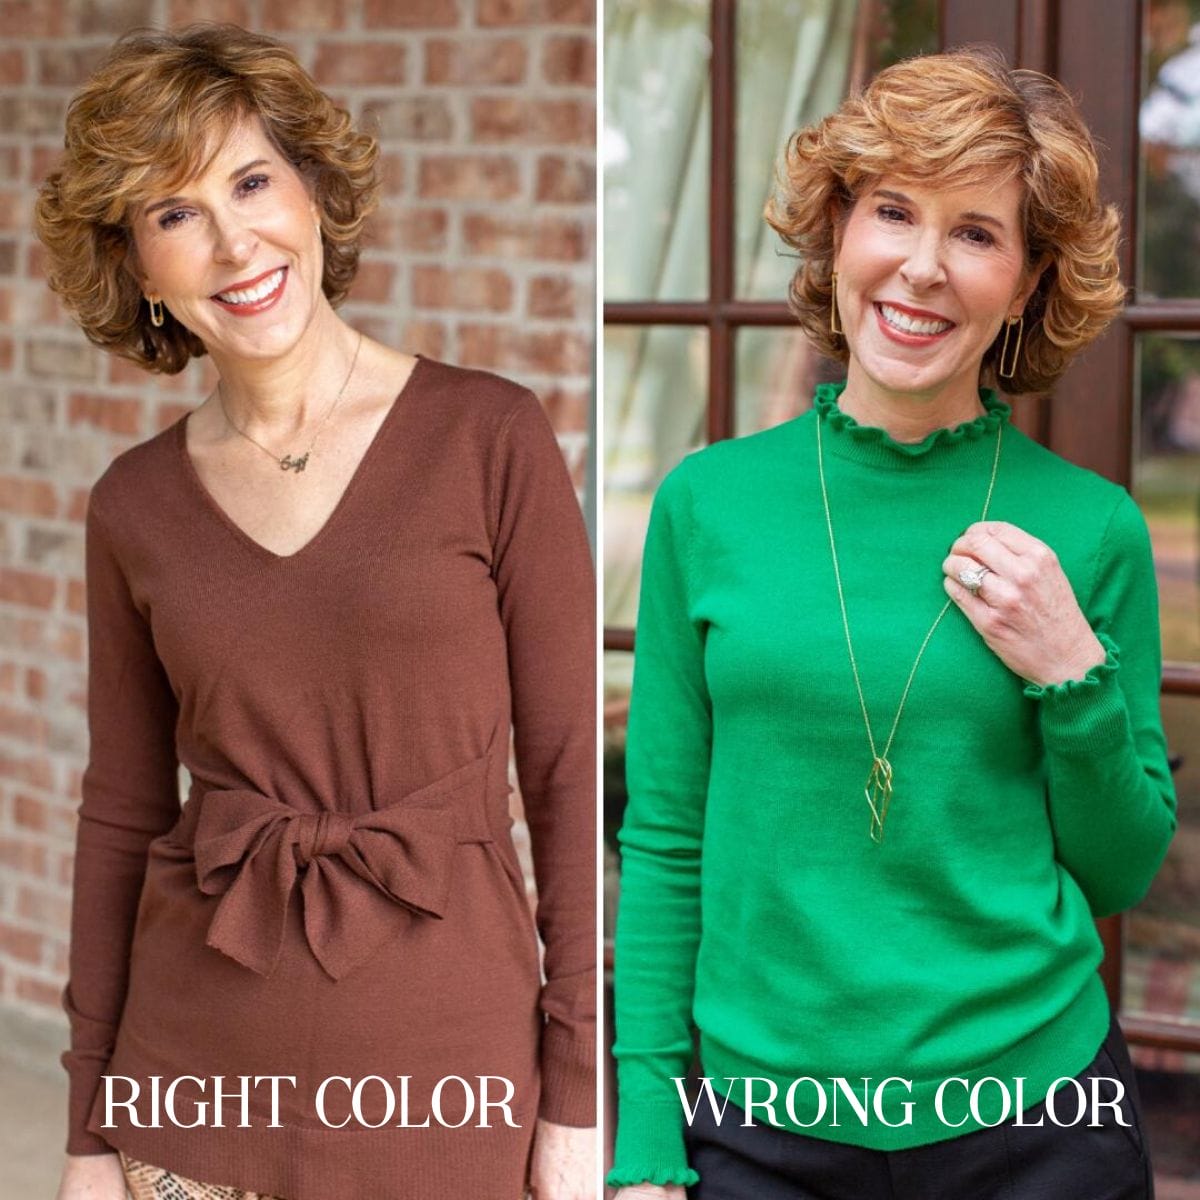 What Are Your Most Flattering Colors?